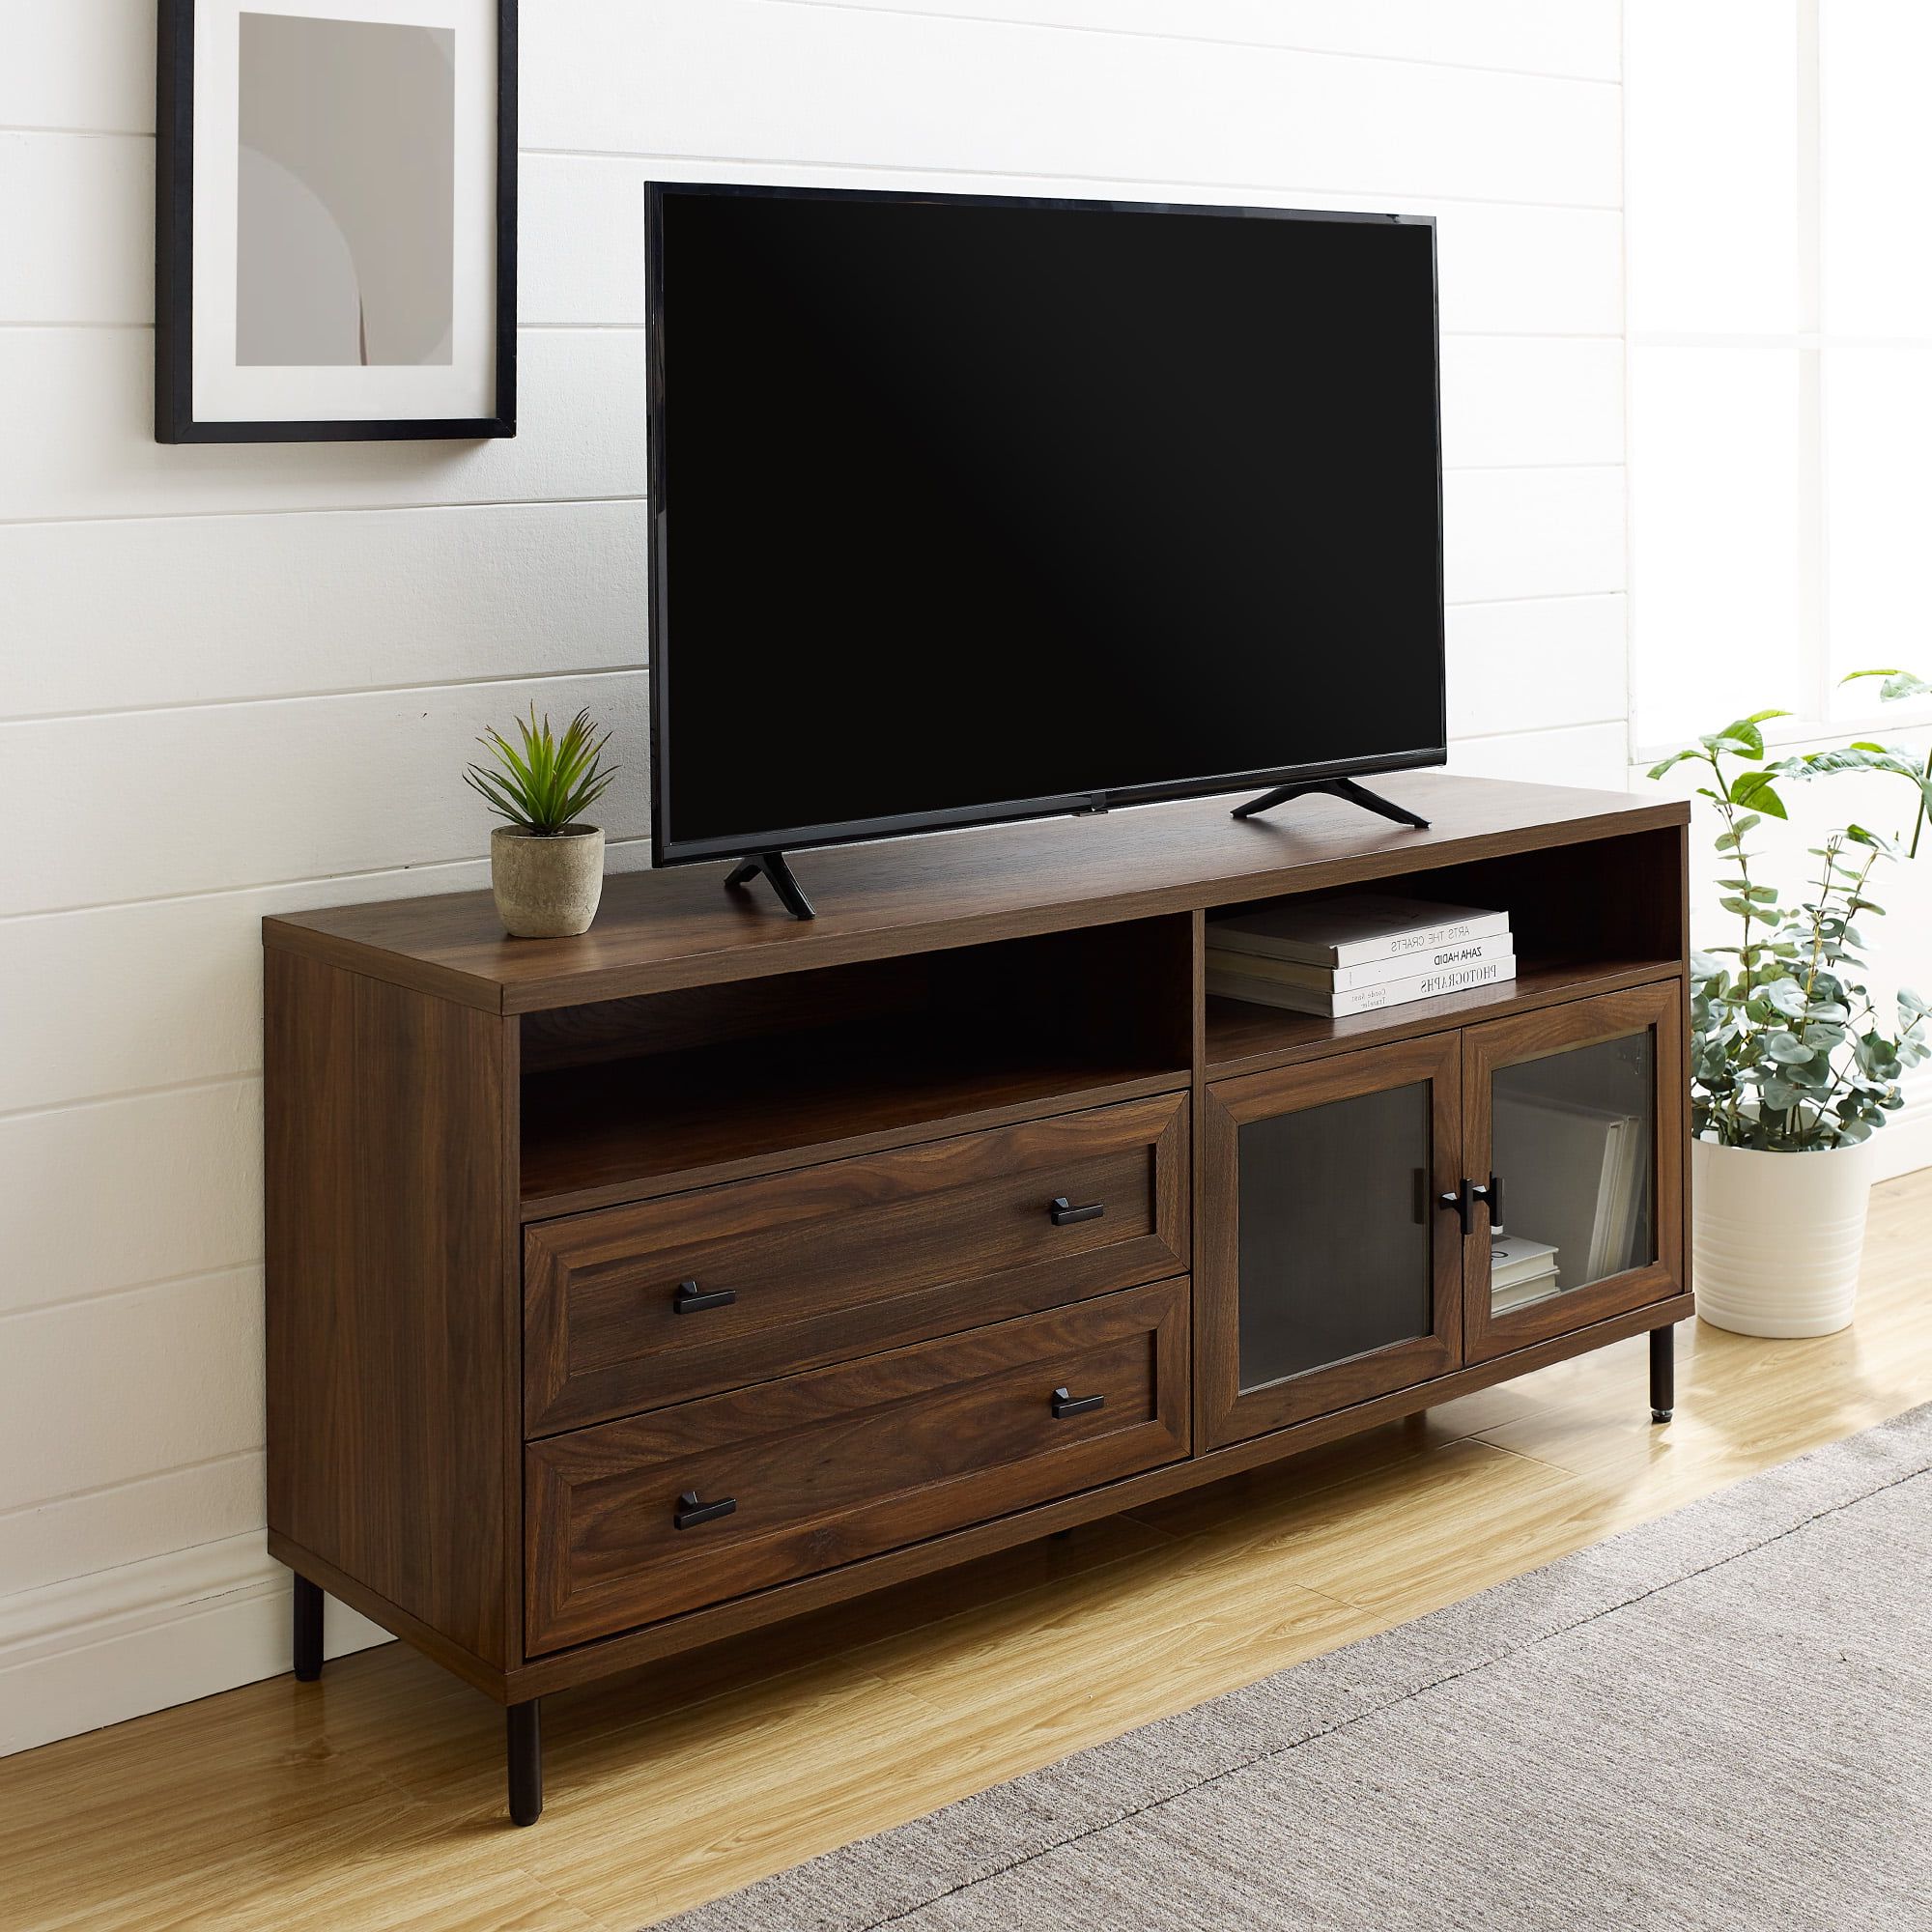 Manor Park Modern Wood And Glass Tv Stand For Tvs Up To 60", Dark Walnut –  Walmart With Walnut Entertainment Centers (Gallery 9 of 20)